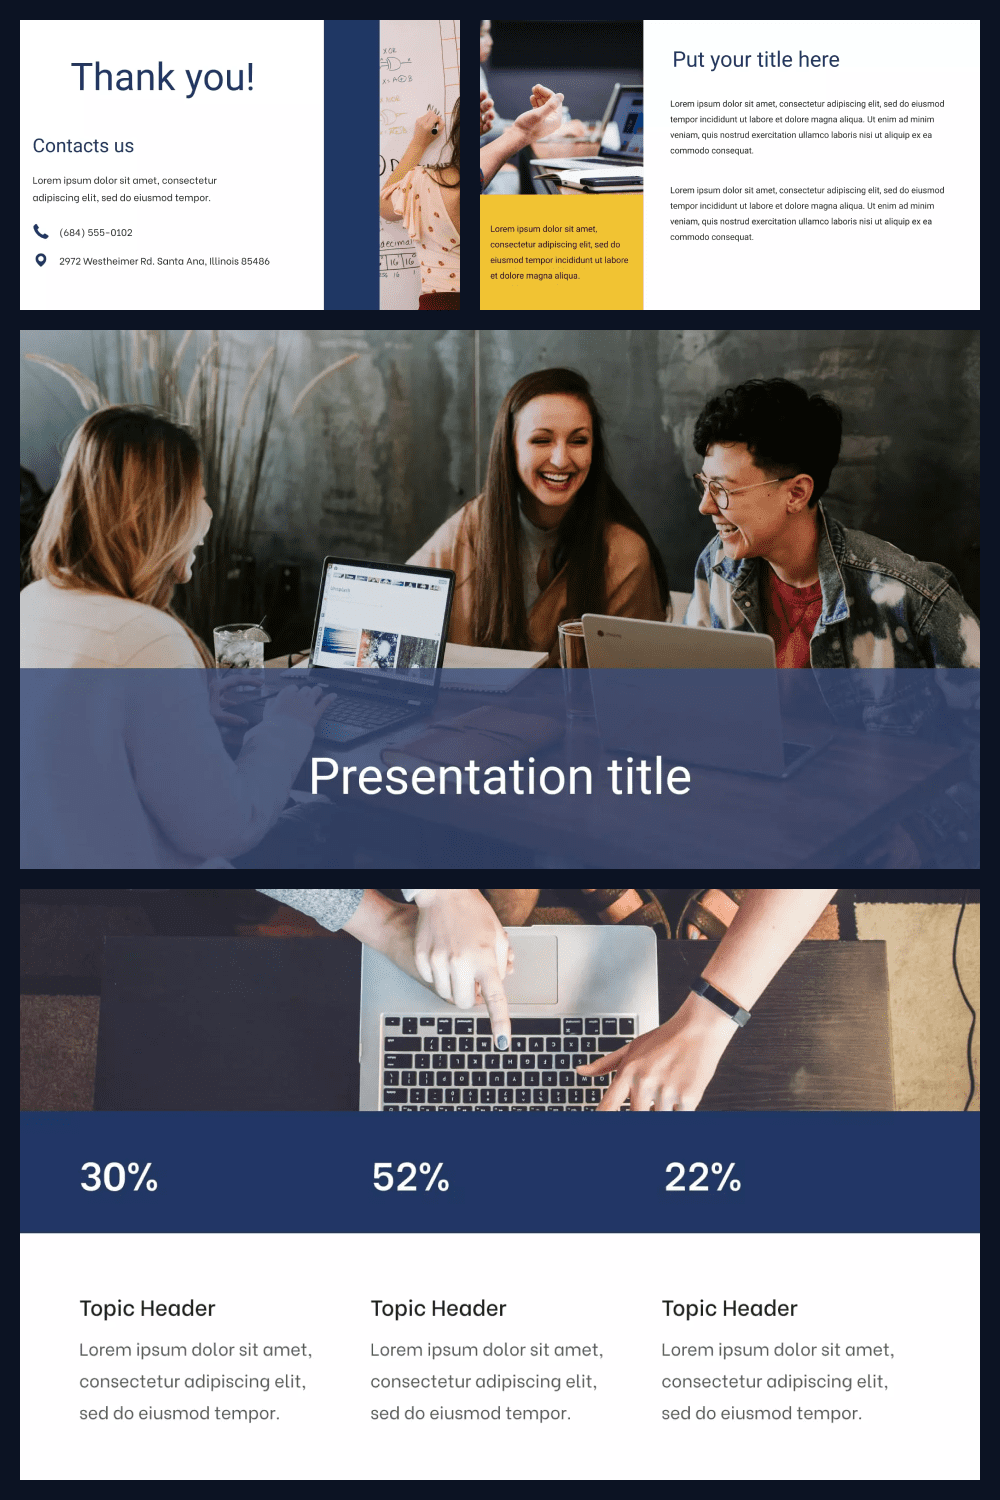 Free Education PowerPoint Templates.